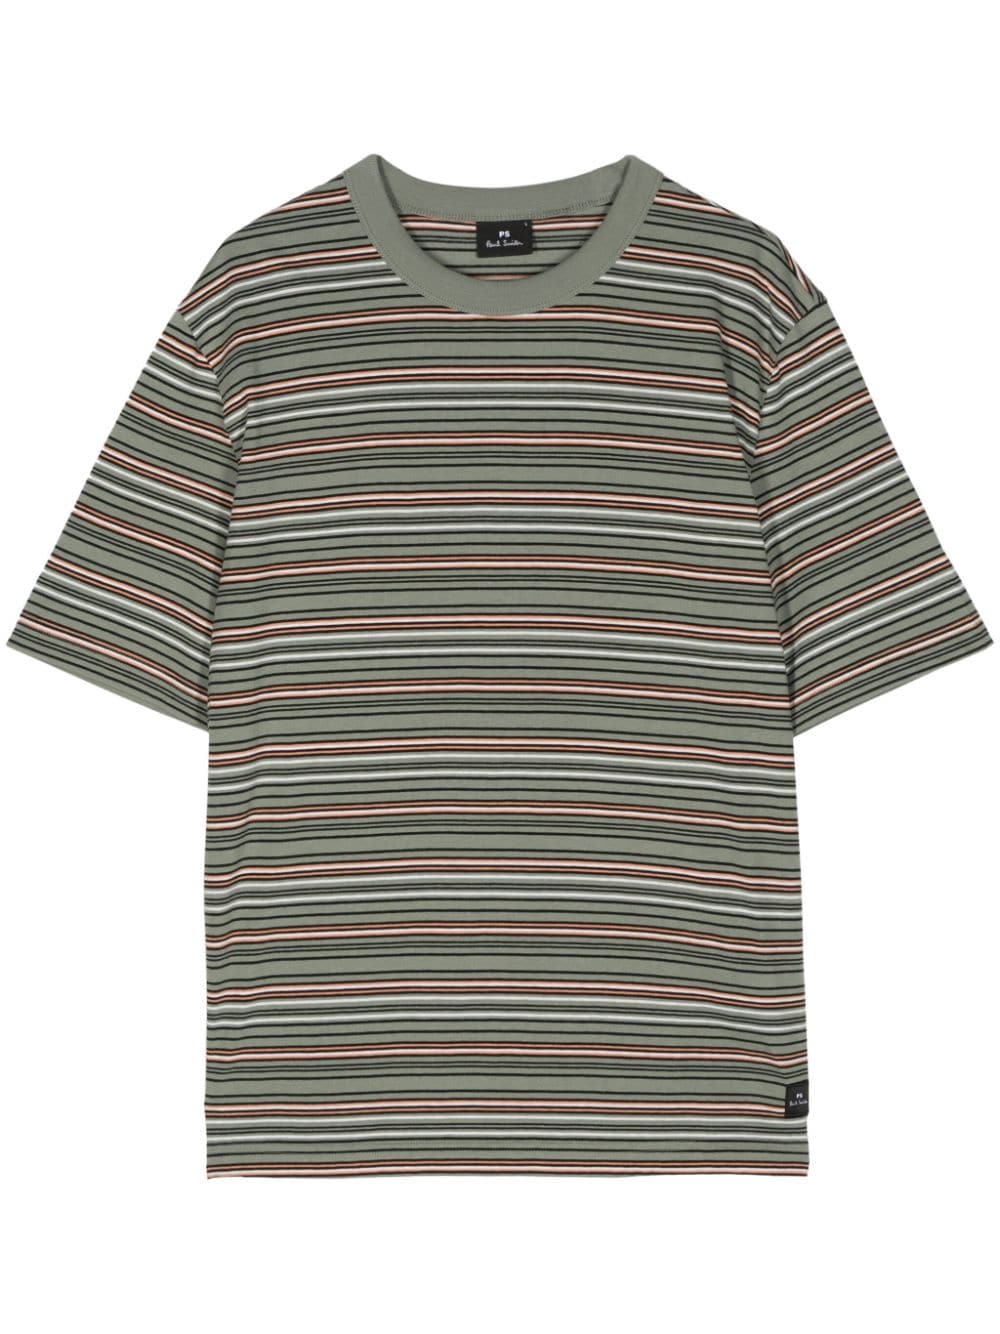 PS Paul Smith striped cotton T-shirt - Green von PS Paul Smith